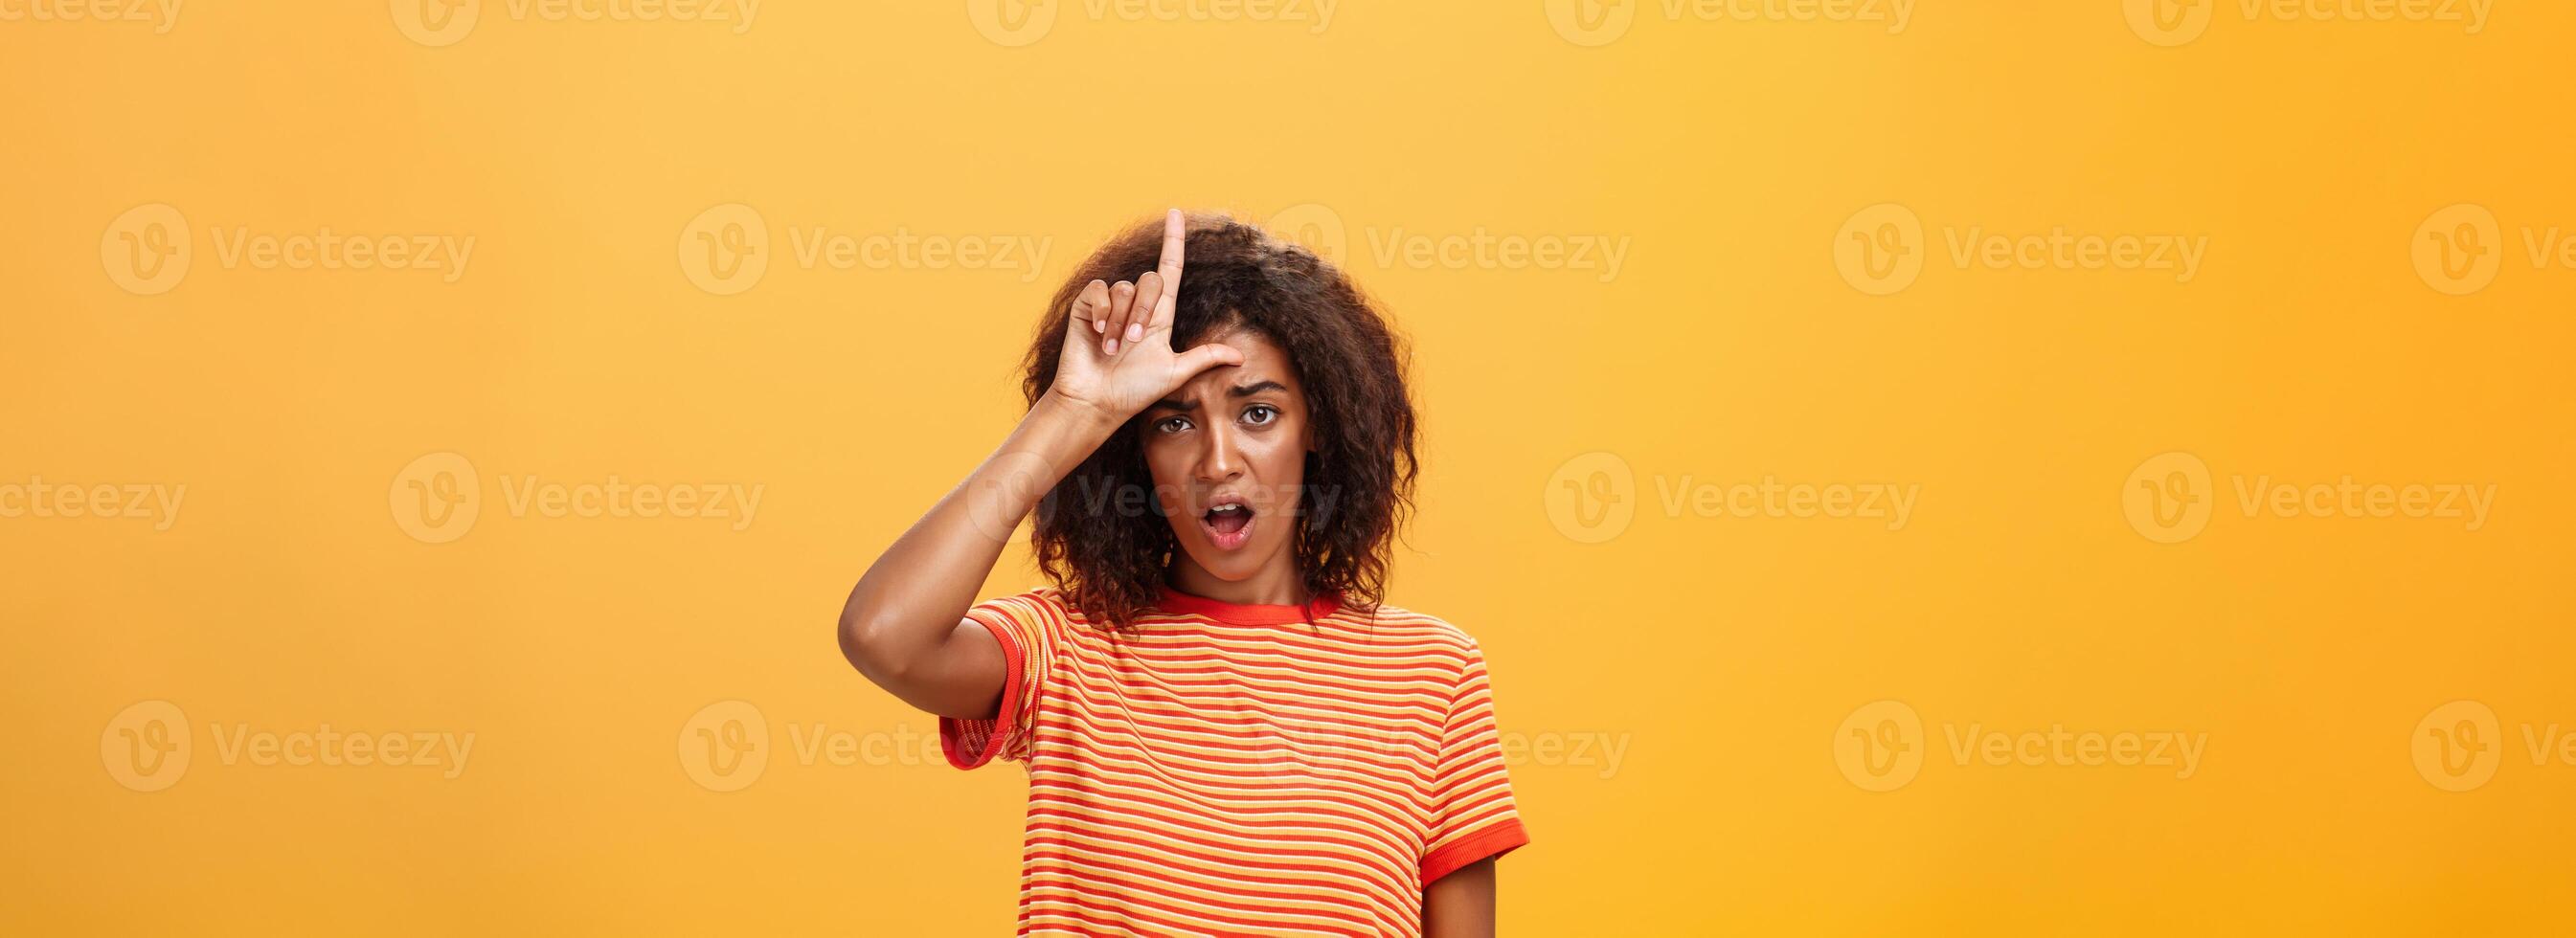 Girl thinks she loser. Portrait of gloomy bothered and displeased african american woman with afro hairstyle showing l word over forehead complaining feeling gloomy and unhappy over orange background photo